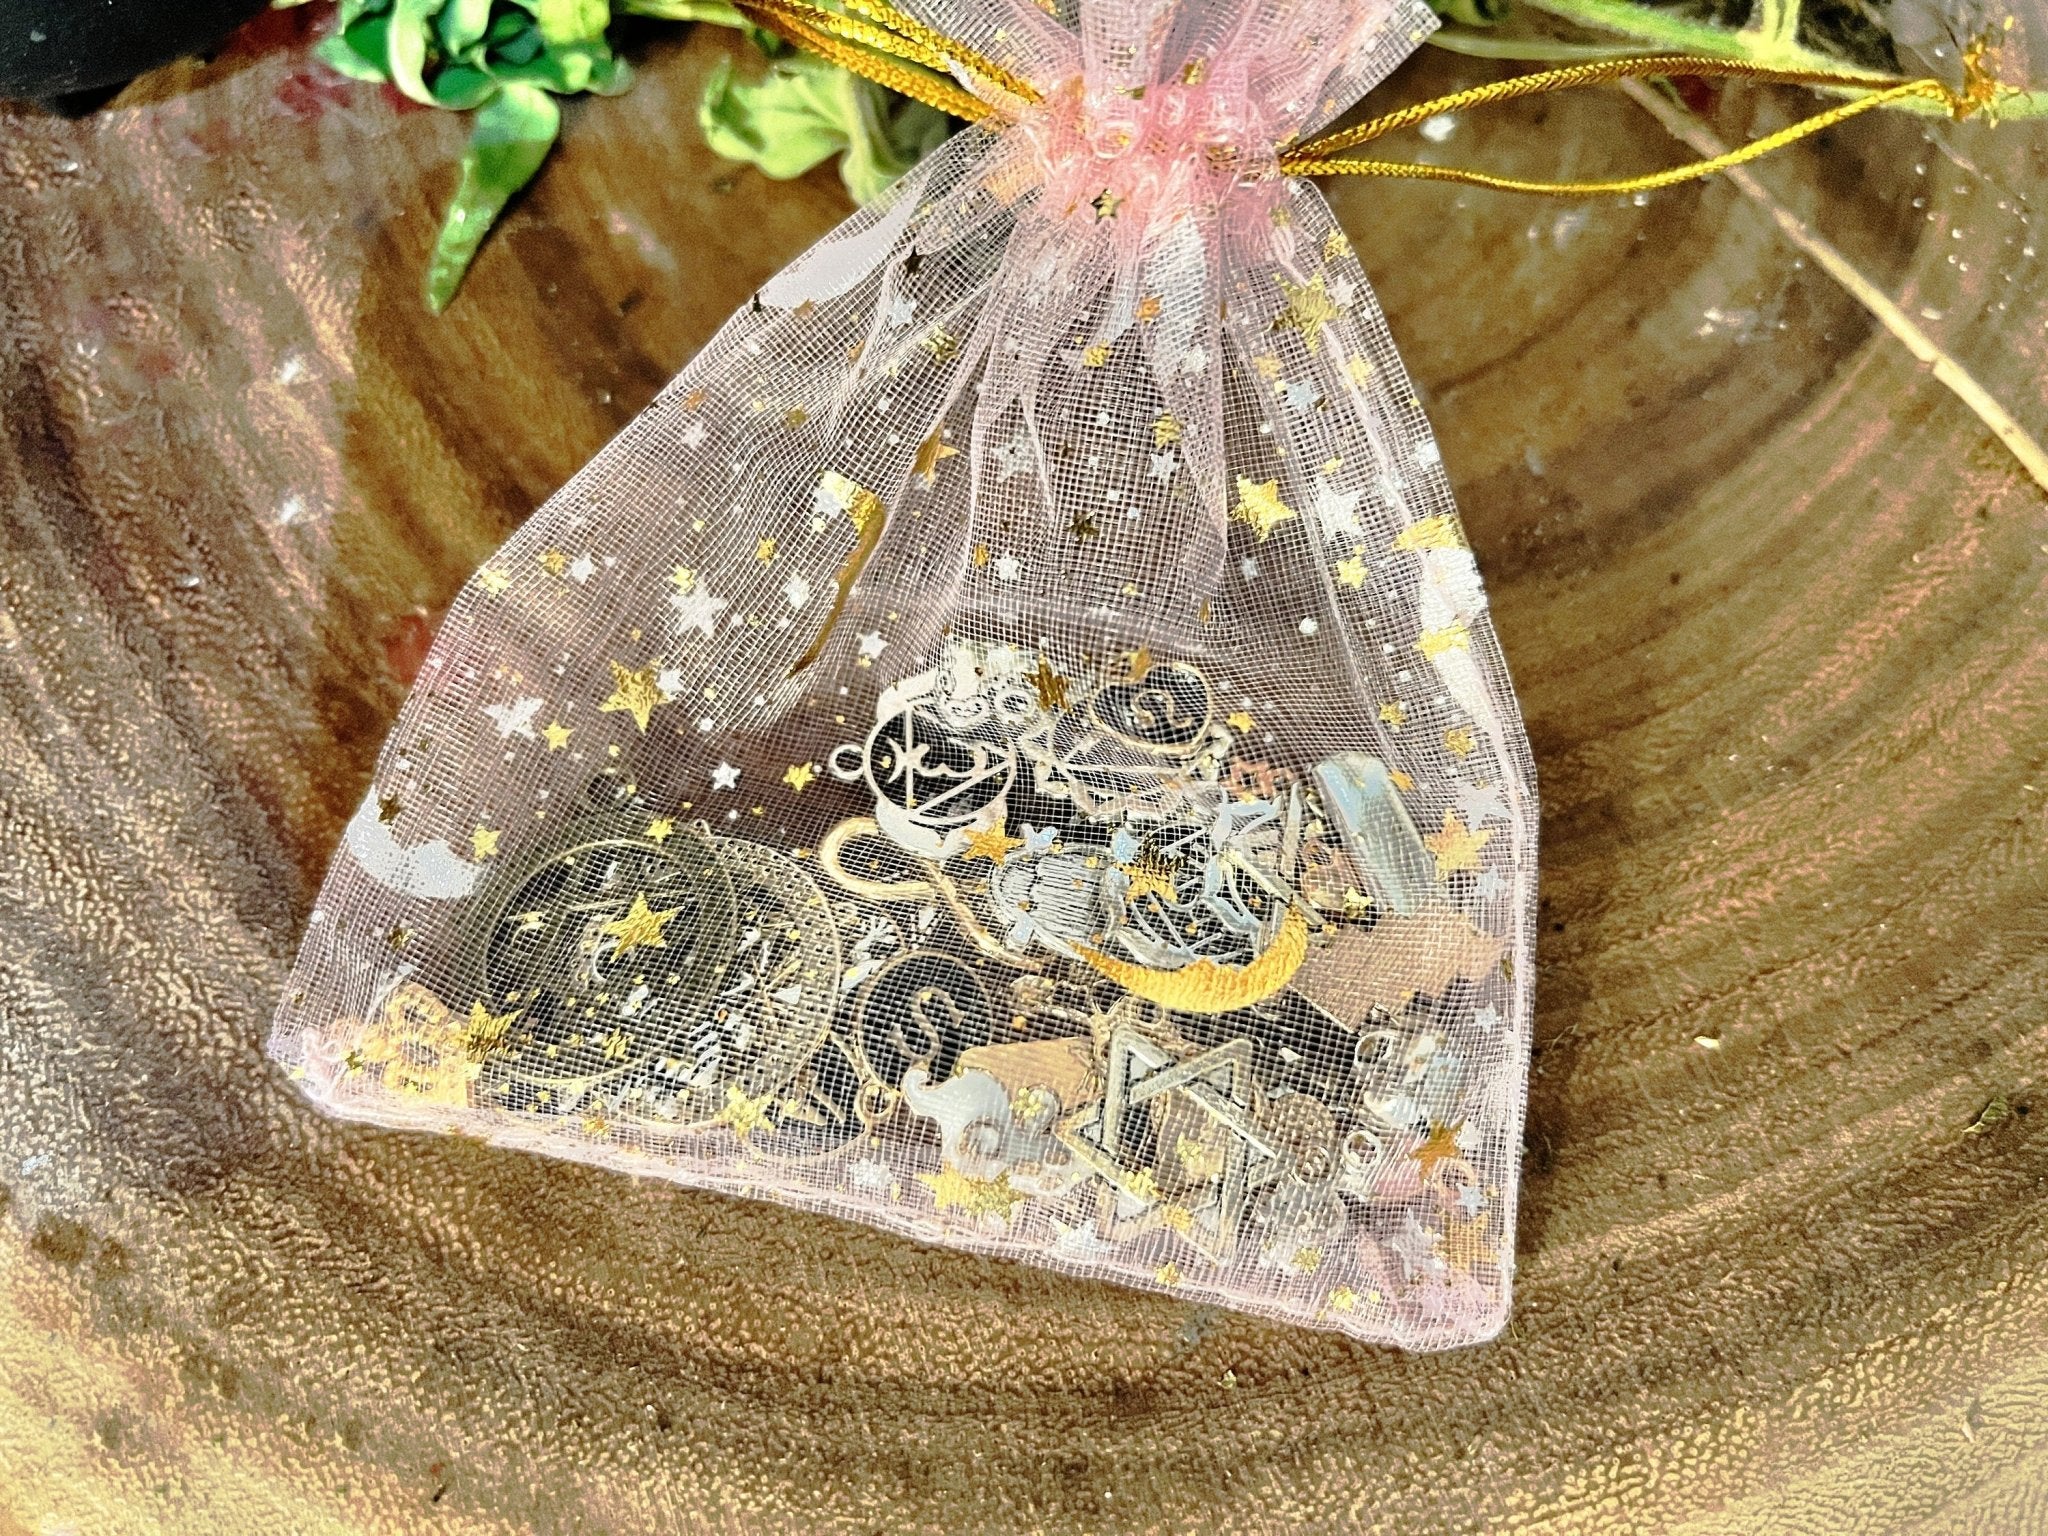 Confetti Scoop Charms | Tin Lucky Dip Mystery Divination Charm Casting Witch Kit Readings Silver Gold Enamel | Zodiac - MysticBluuMoonTarot